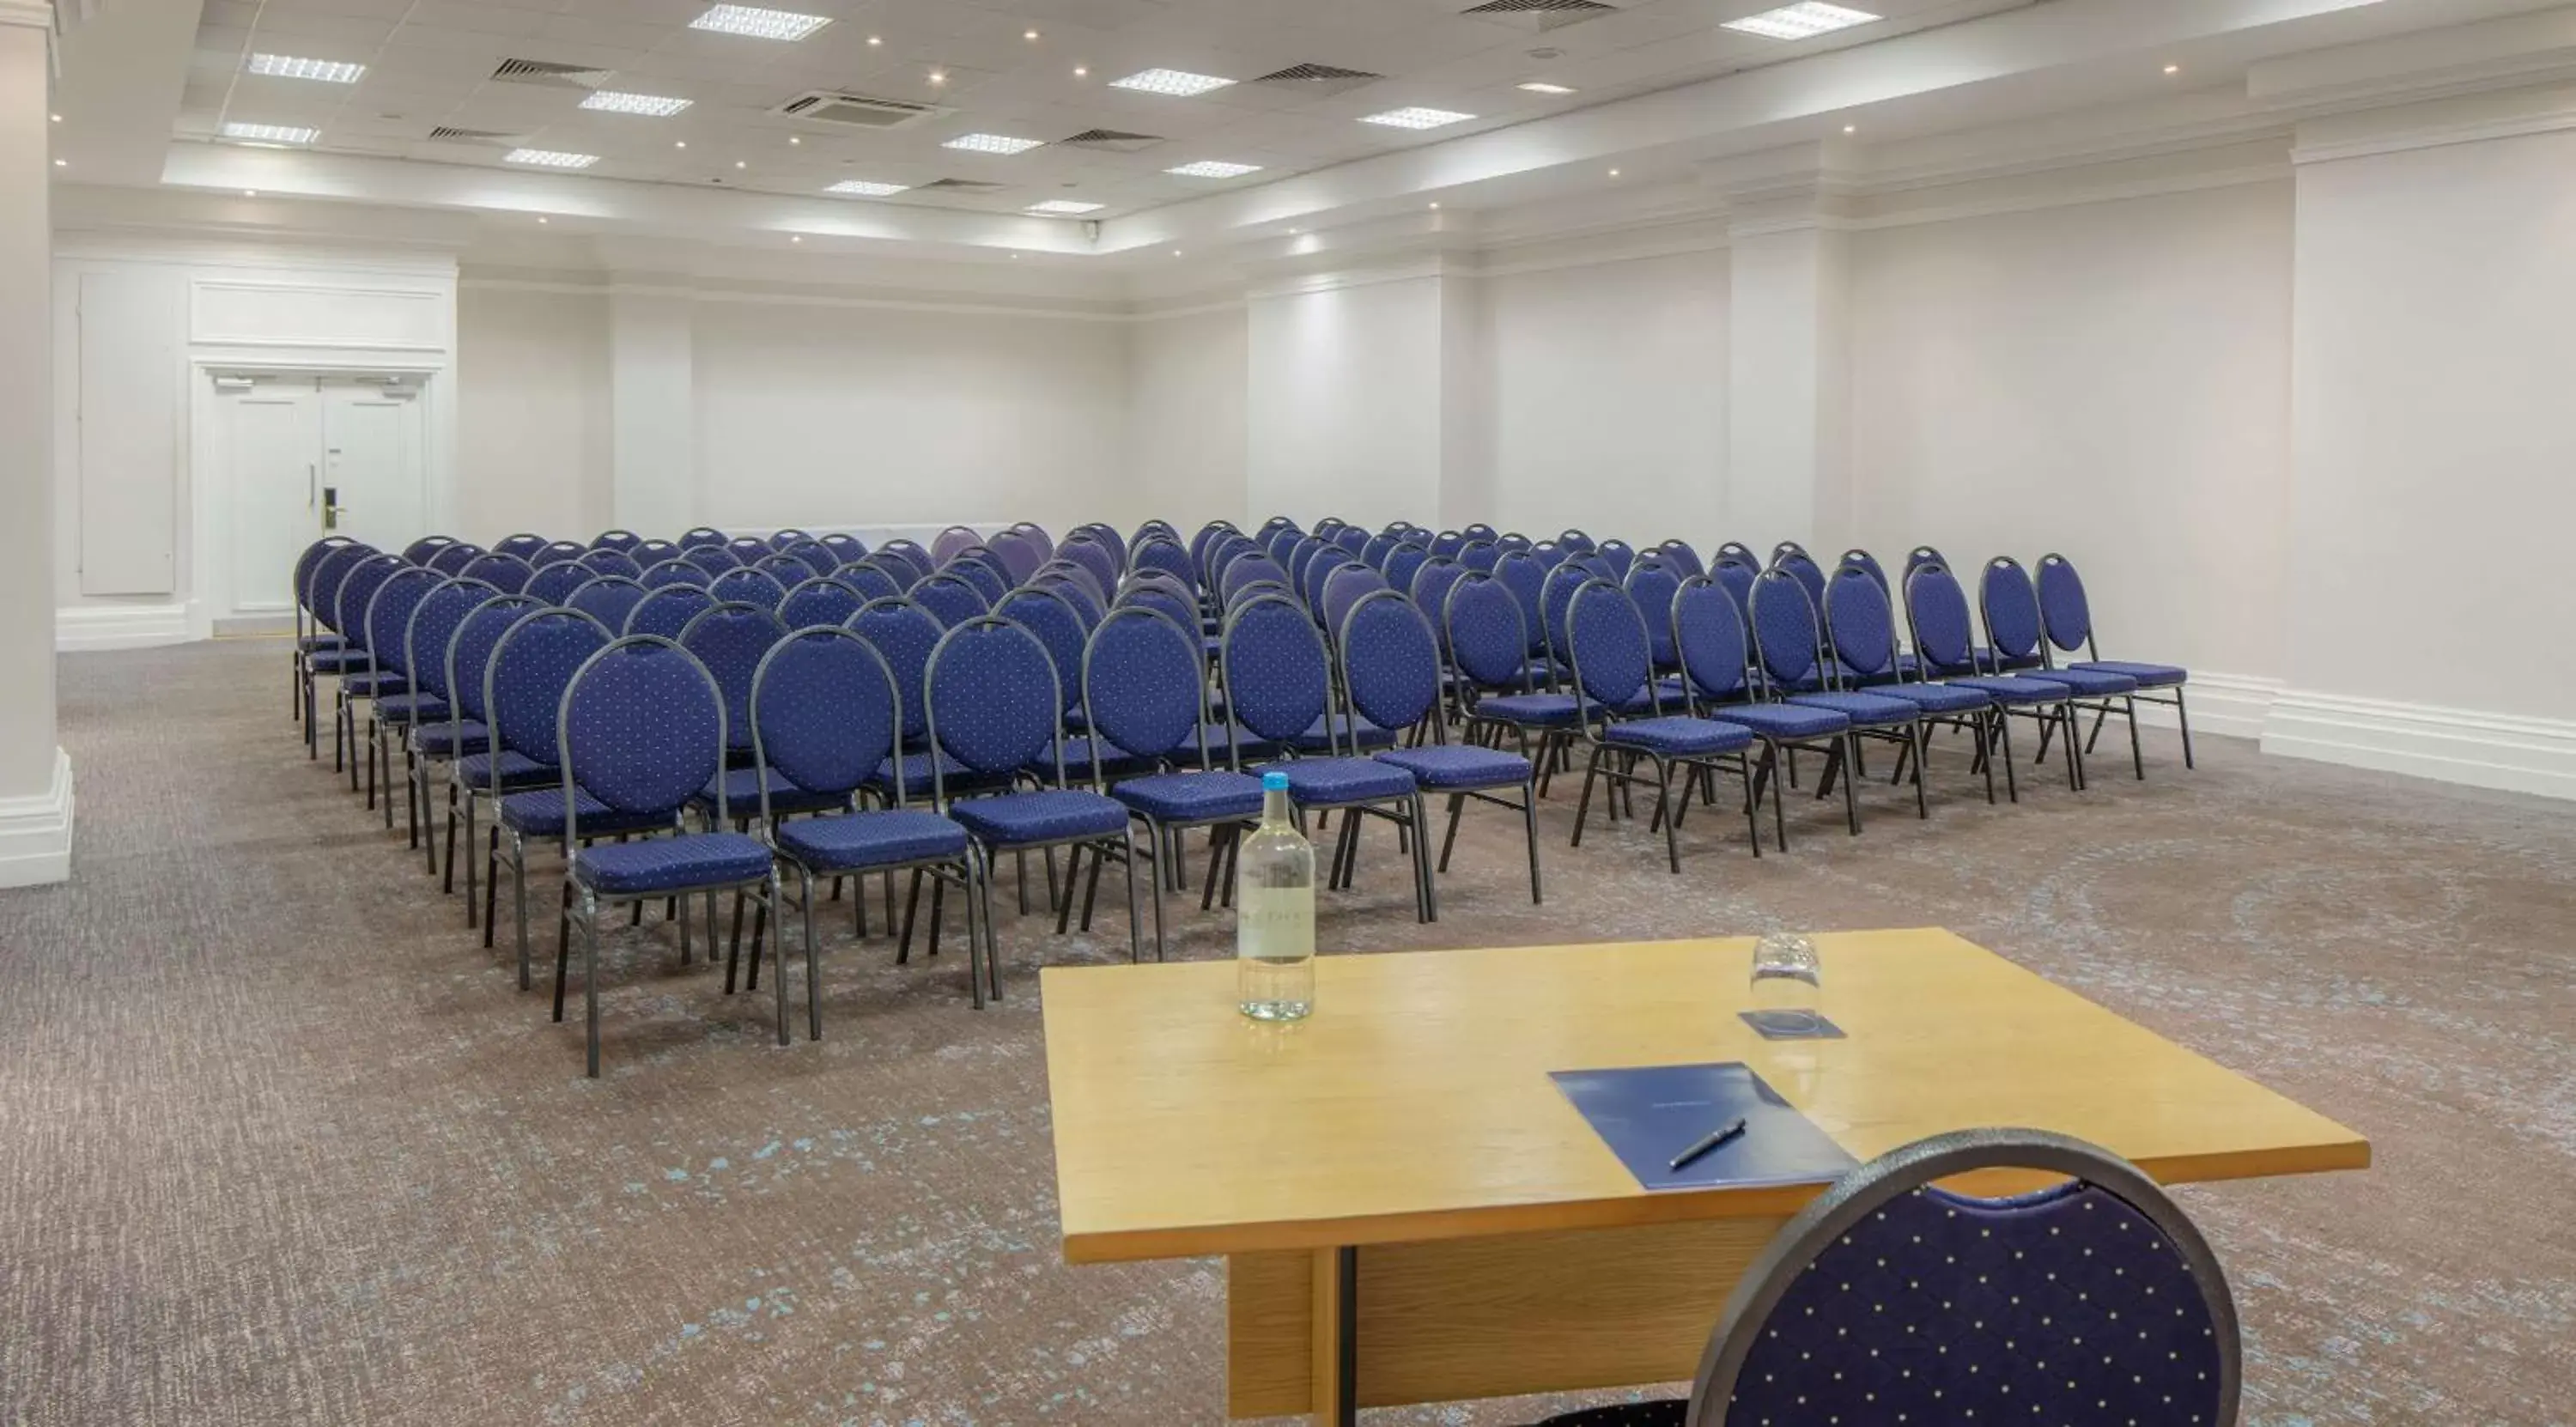 Meeting/conference room in Hilton Nottingham Hotel